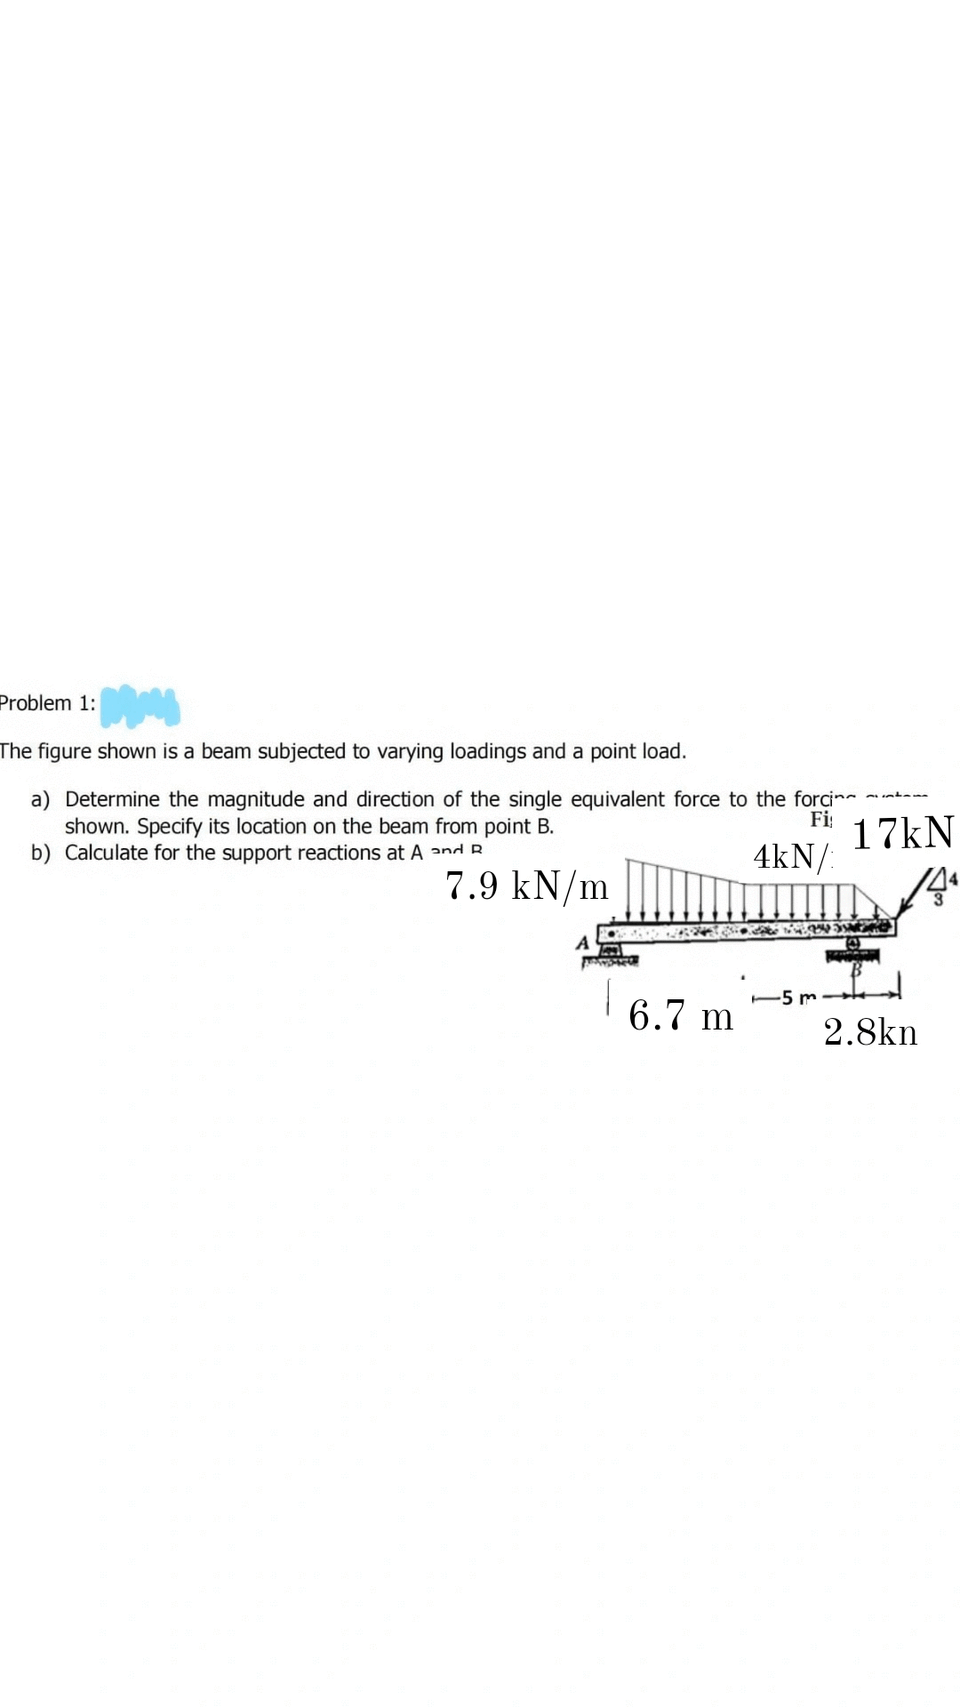 Problem 1:
The figure shown is a beam subjected to varying loadings and a point load.
a) Determine the magnitude and direction of the single equivalent force to the forci
shown. Specify its location on the beam from point B.
b) Calculate for the support reactions at A and R
Fi
17kN
4kN/:
7.9 kN/m
-5 m
6.7 m
2.8kn
